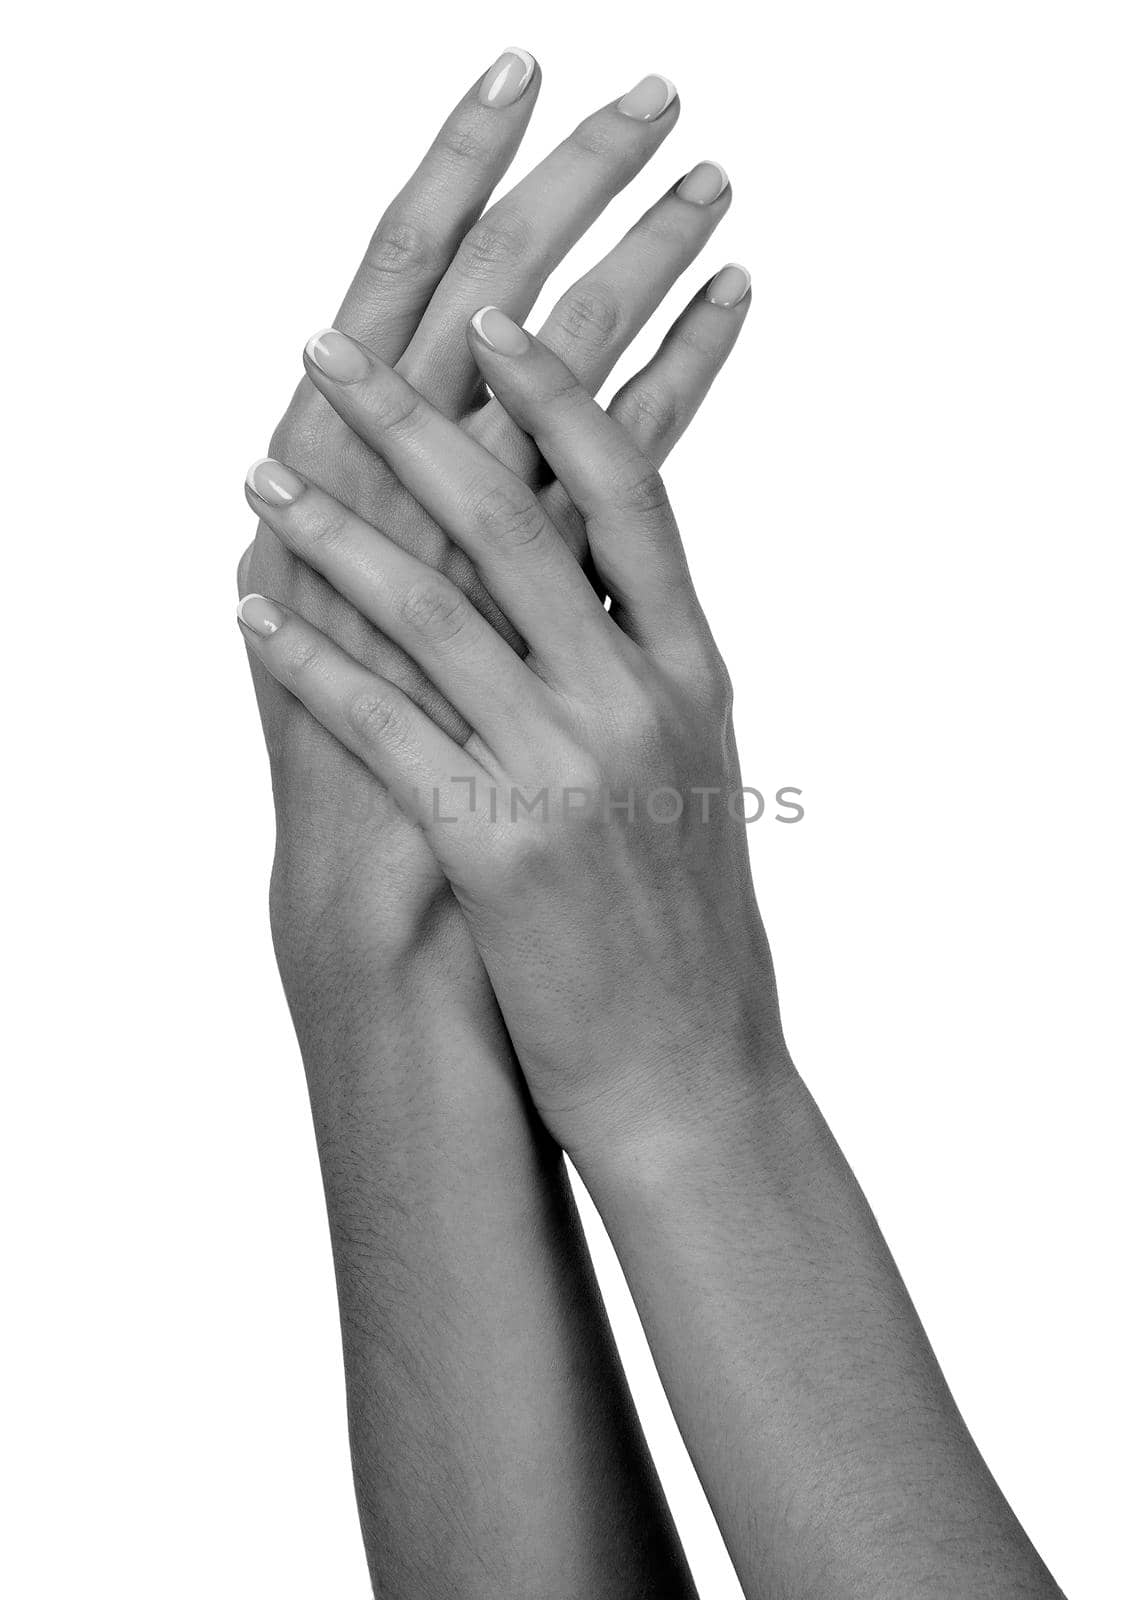 Well-groomed female hands, isolated on white background by Nobilior